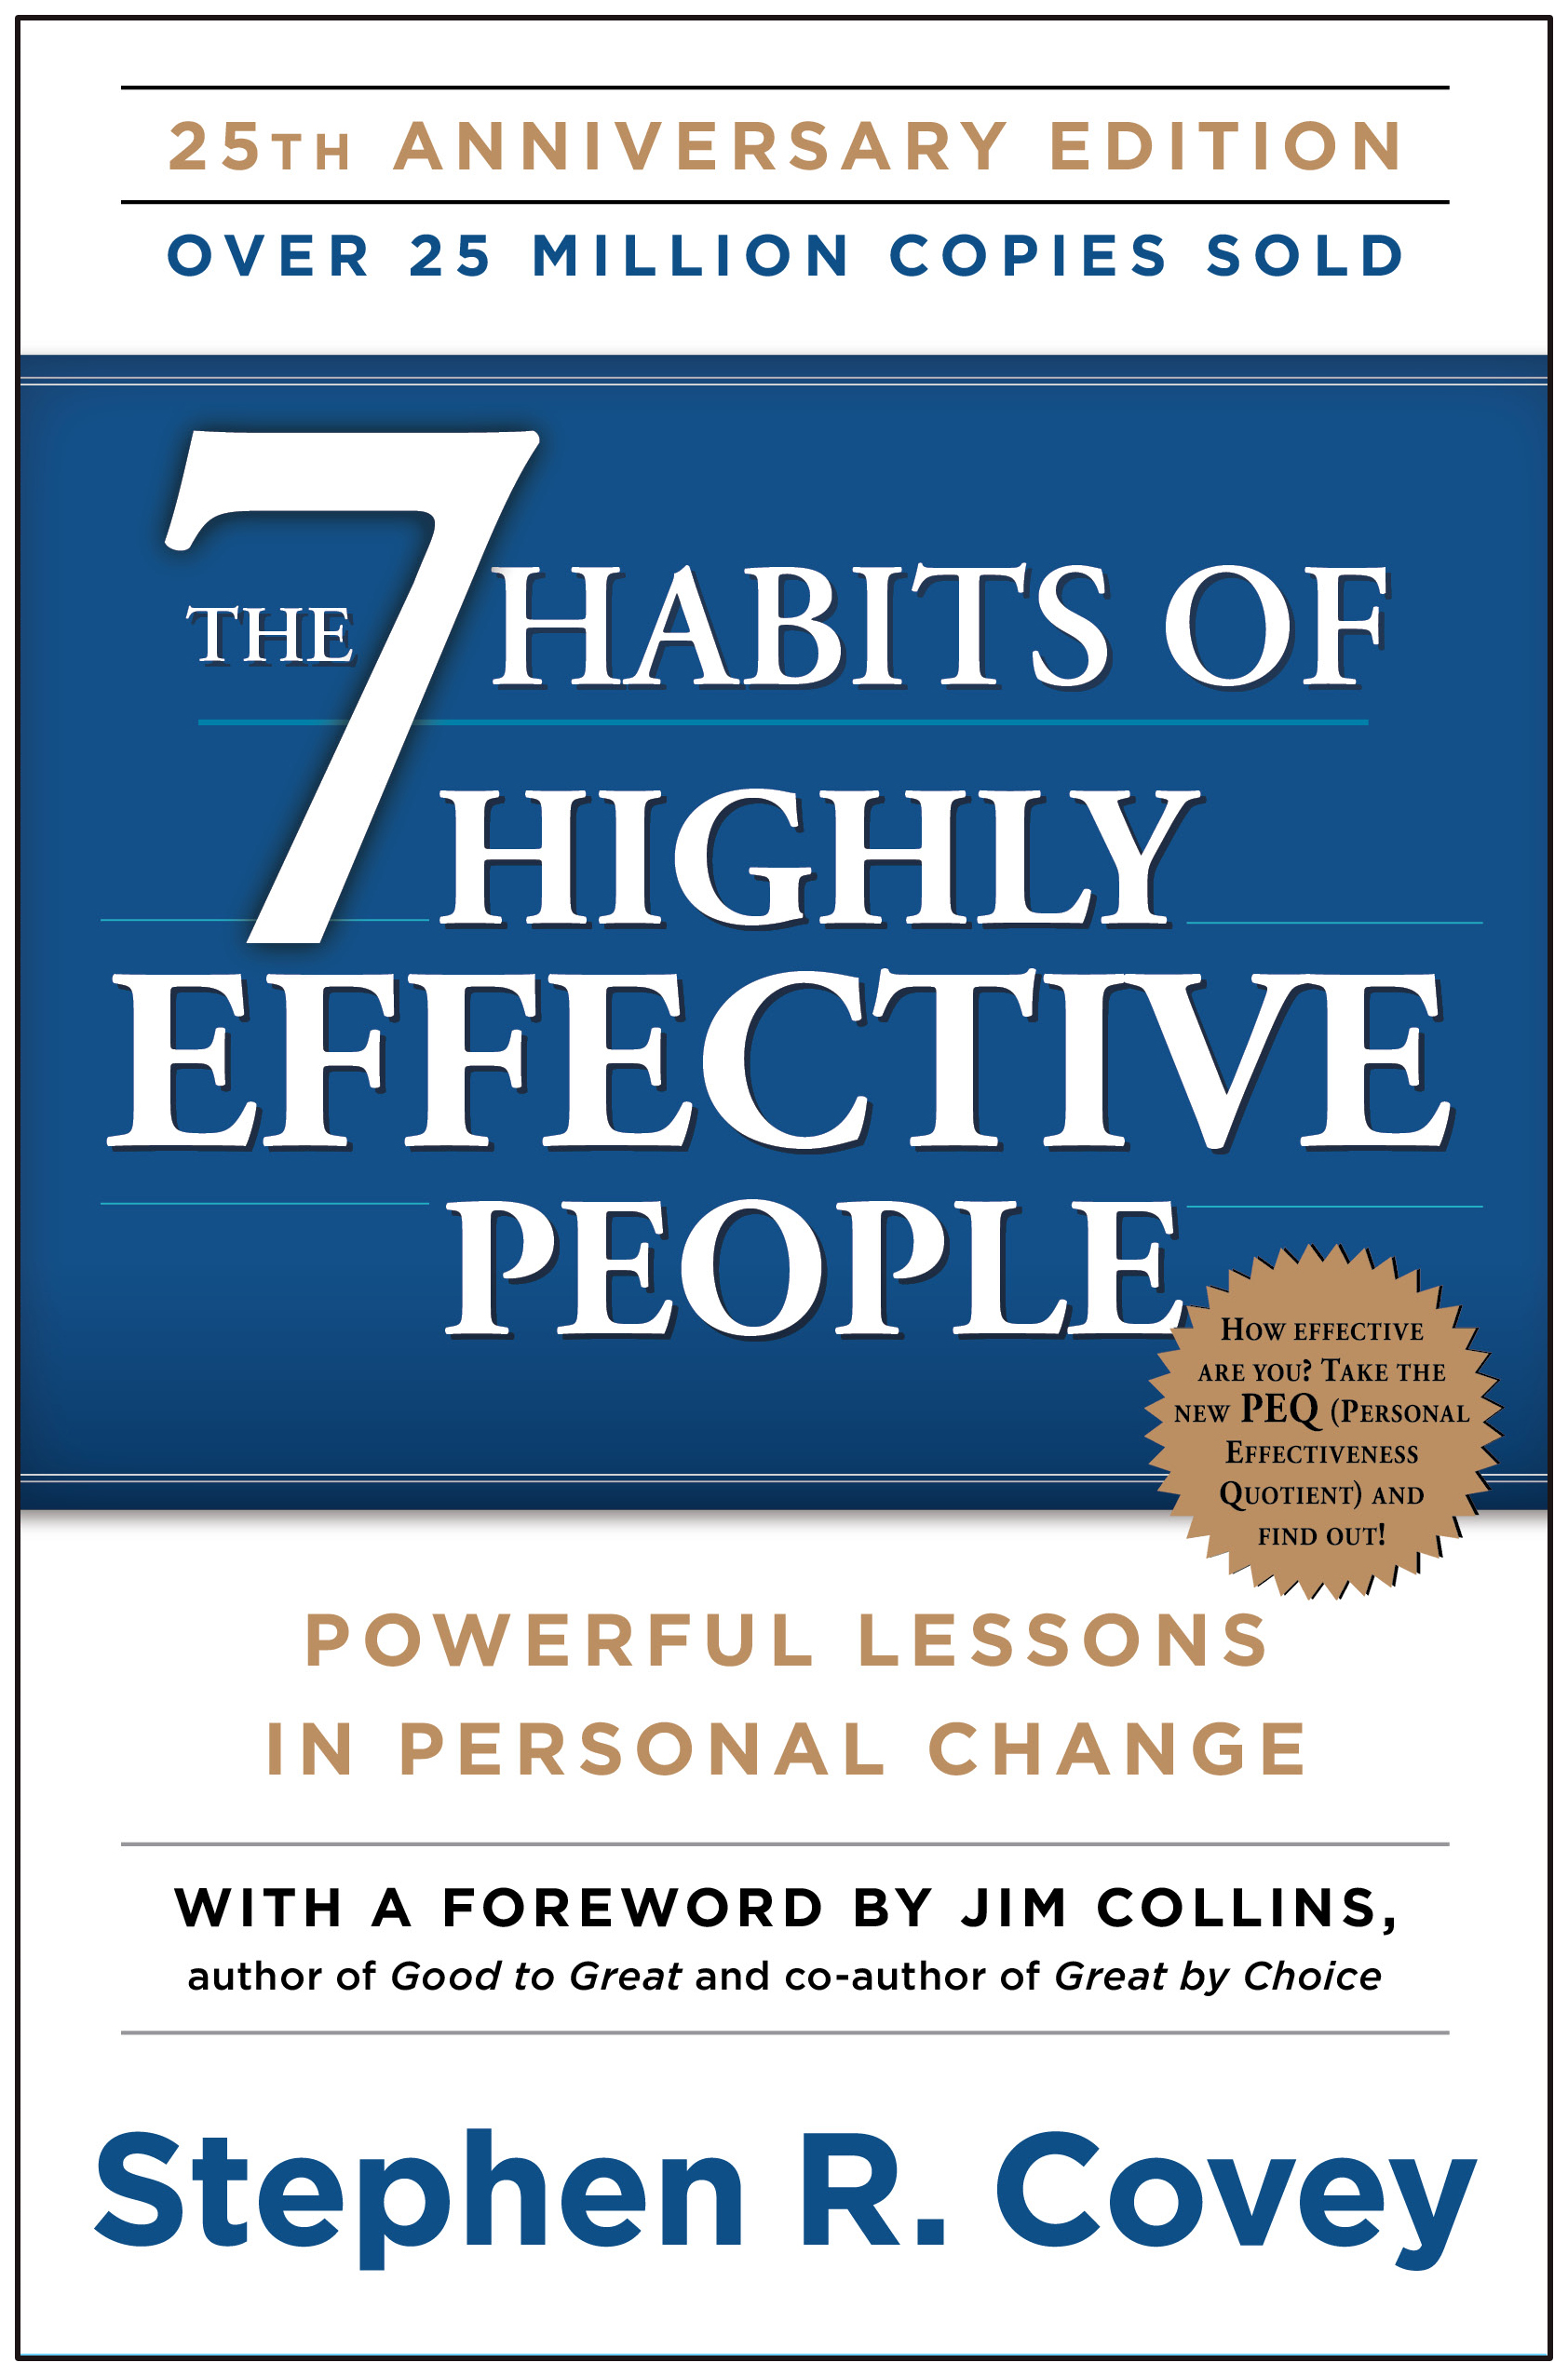 Boek 7 The 7 Habits of highly effective people Stephen R. Covey